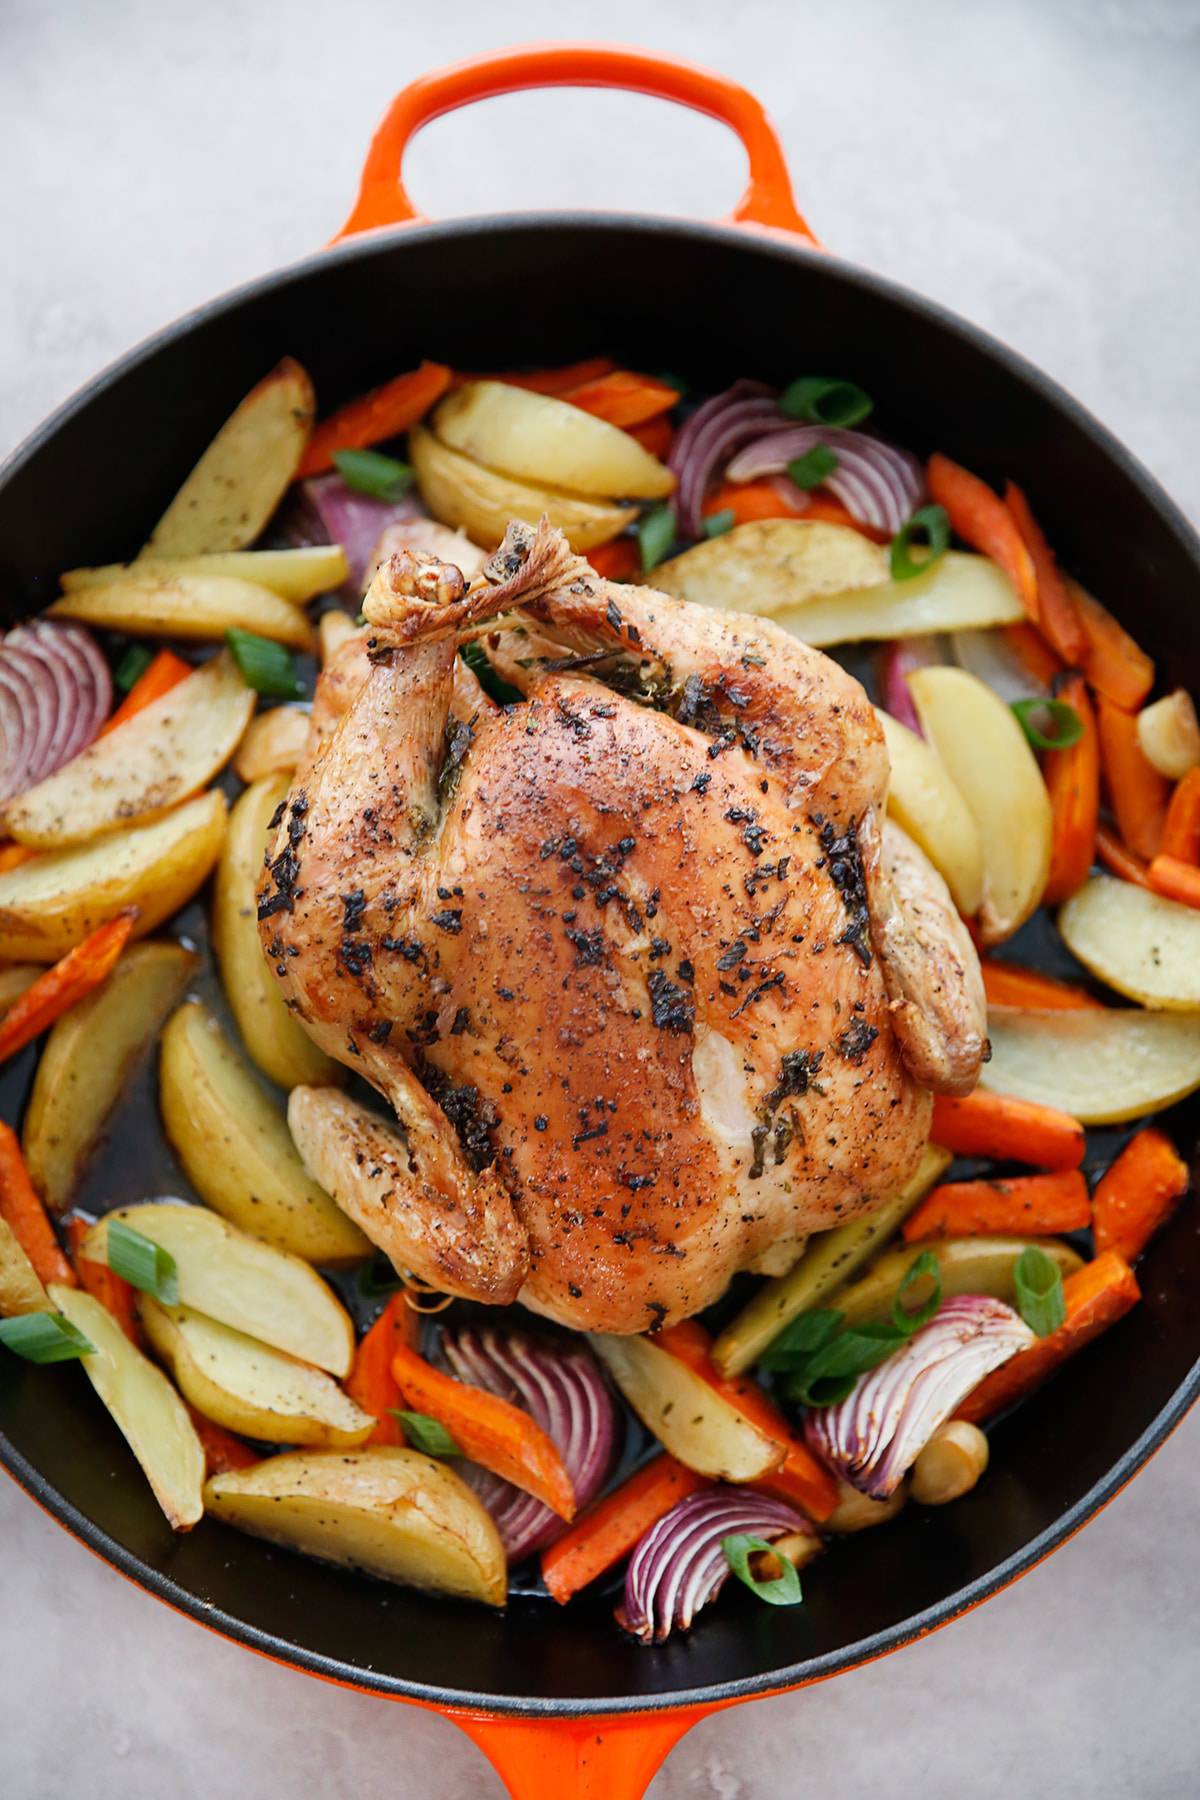 Place a whole roasted chicken in the pan, surrounded by roasted vegetables.